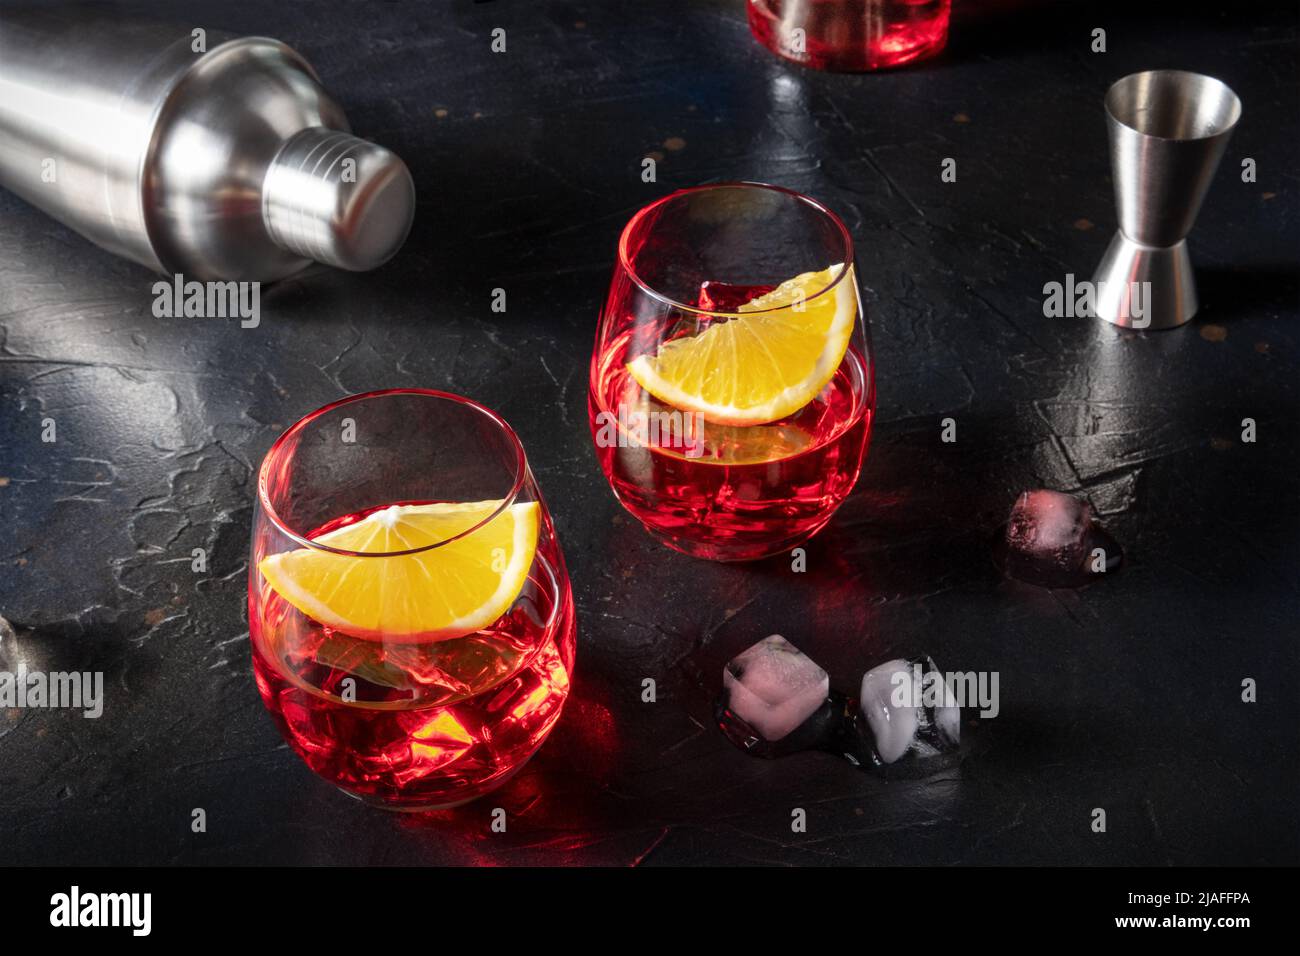 Campari orange cocktails with a jigger and a shaker, with ice cubes and a bottle in the background, on a dark slate background Stock Photo